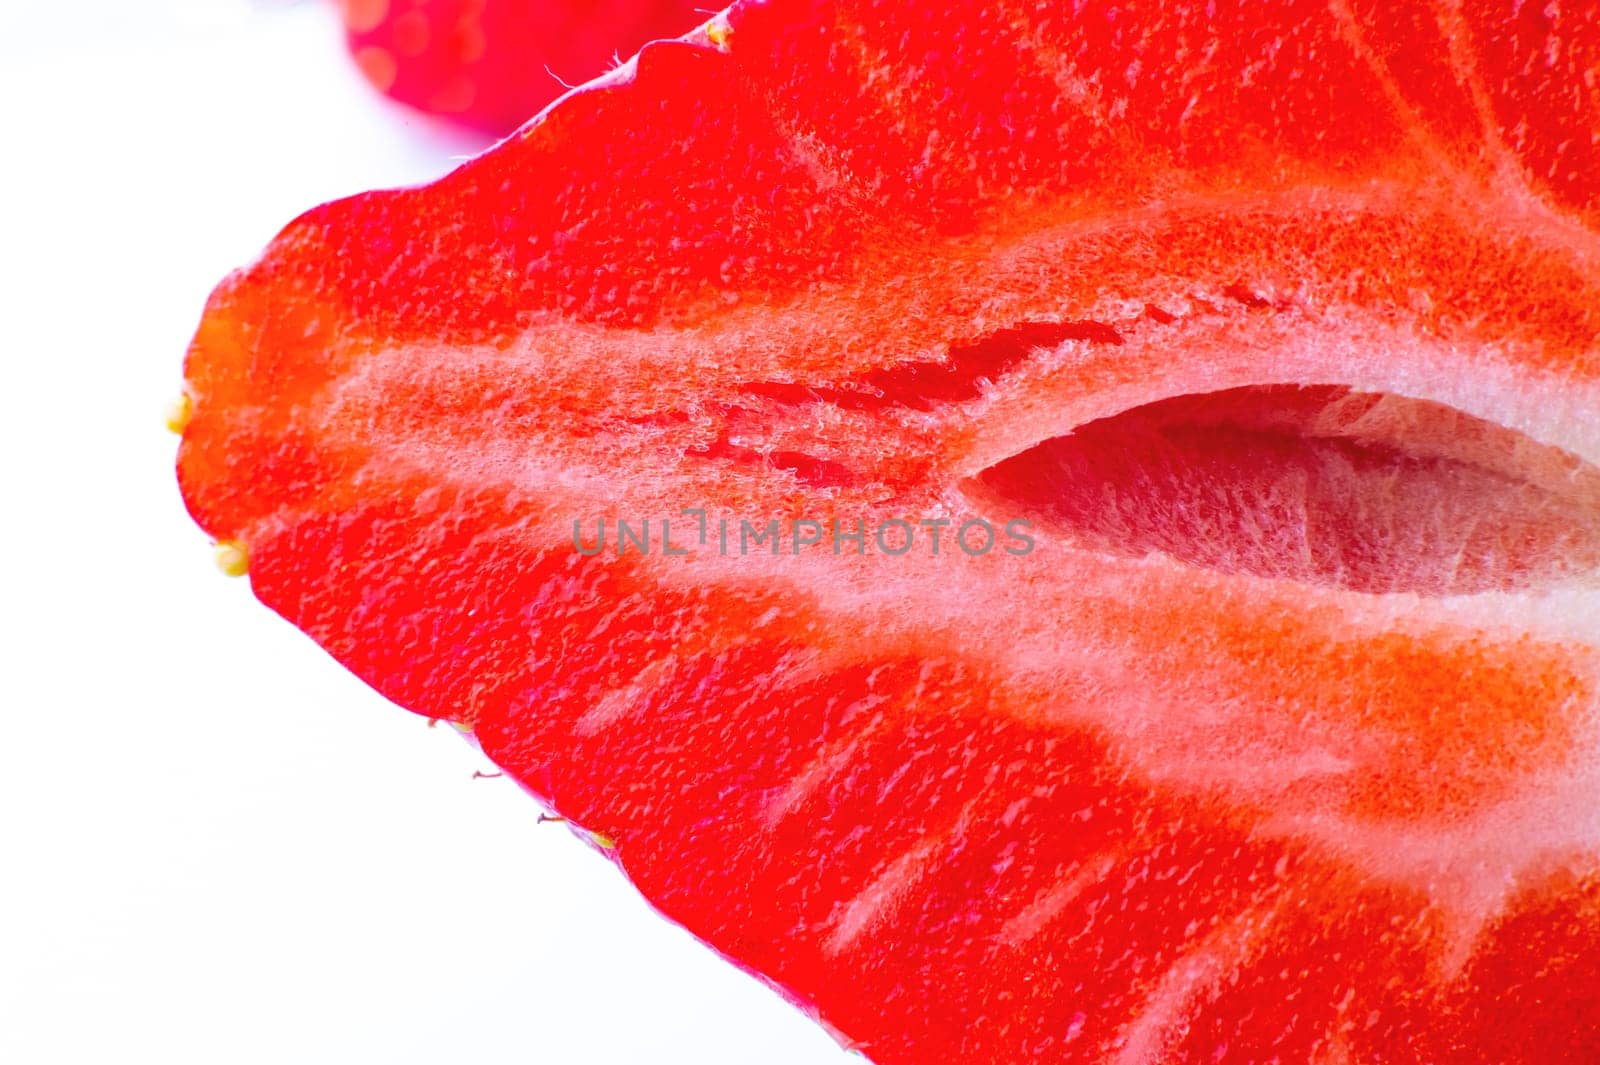 Fresh ripe strawberry fruit, on a white background, close-up. Macro shot of fiber in cut strawberries.